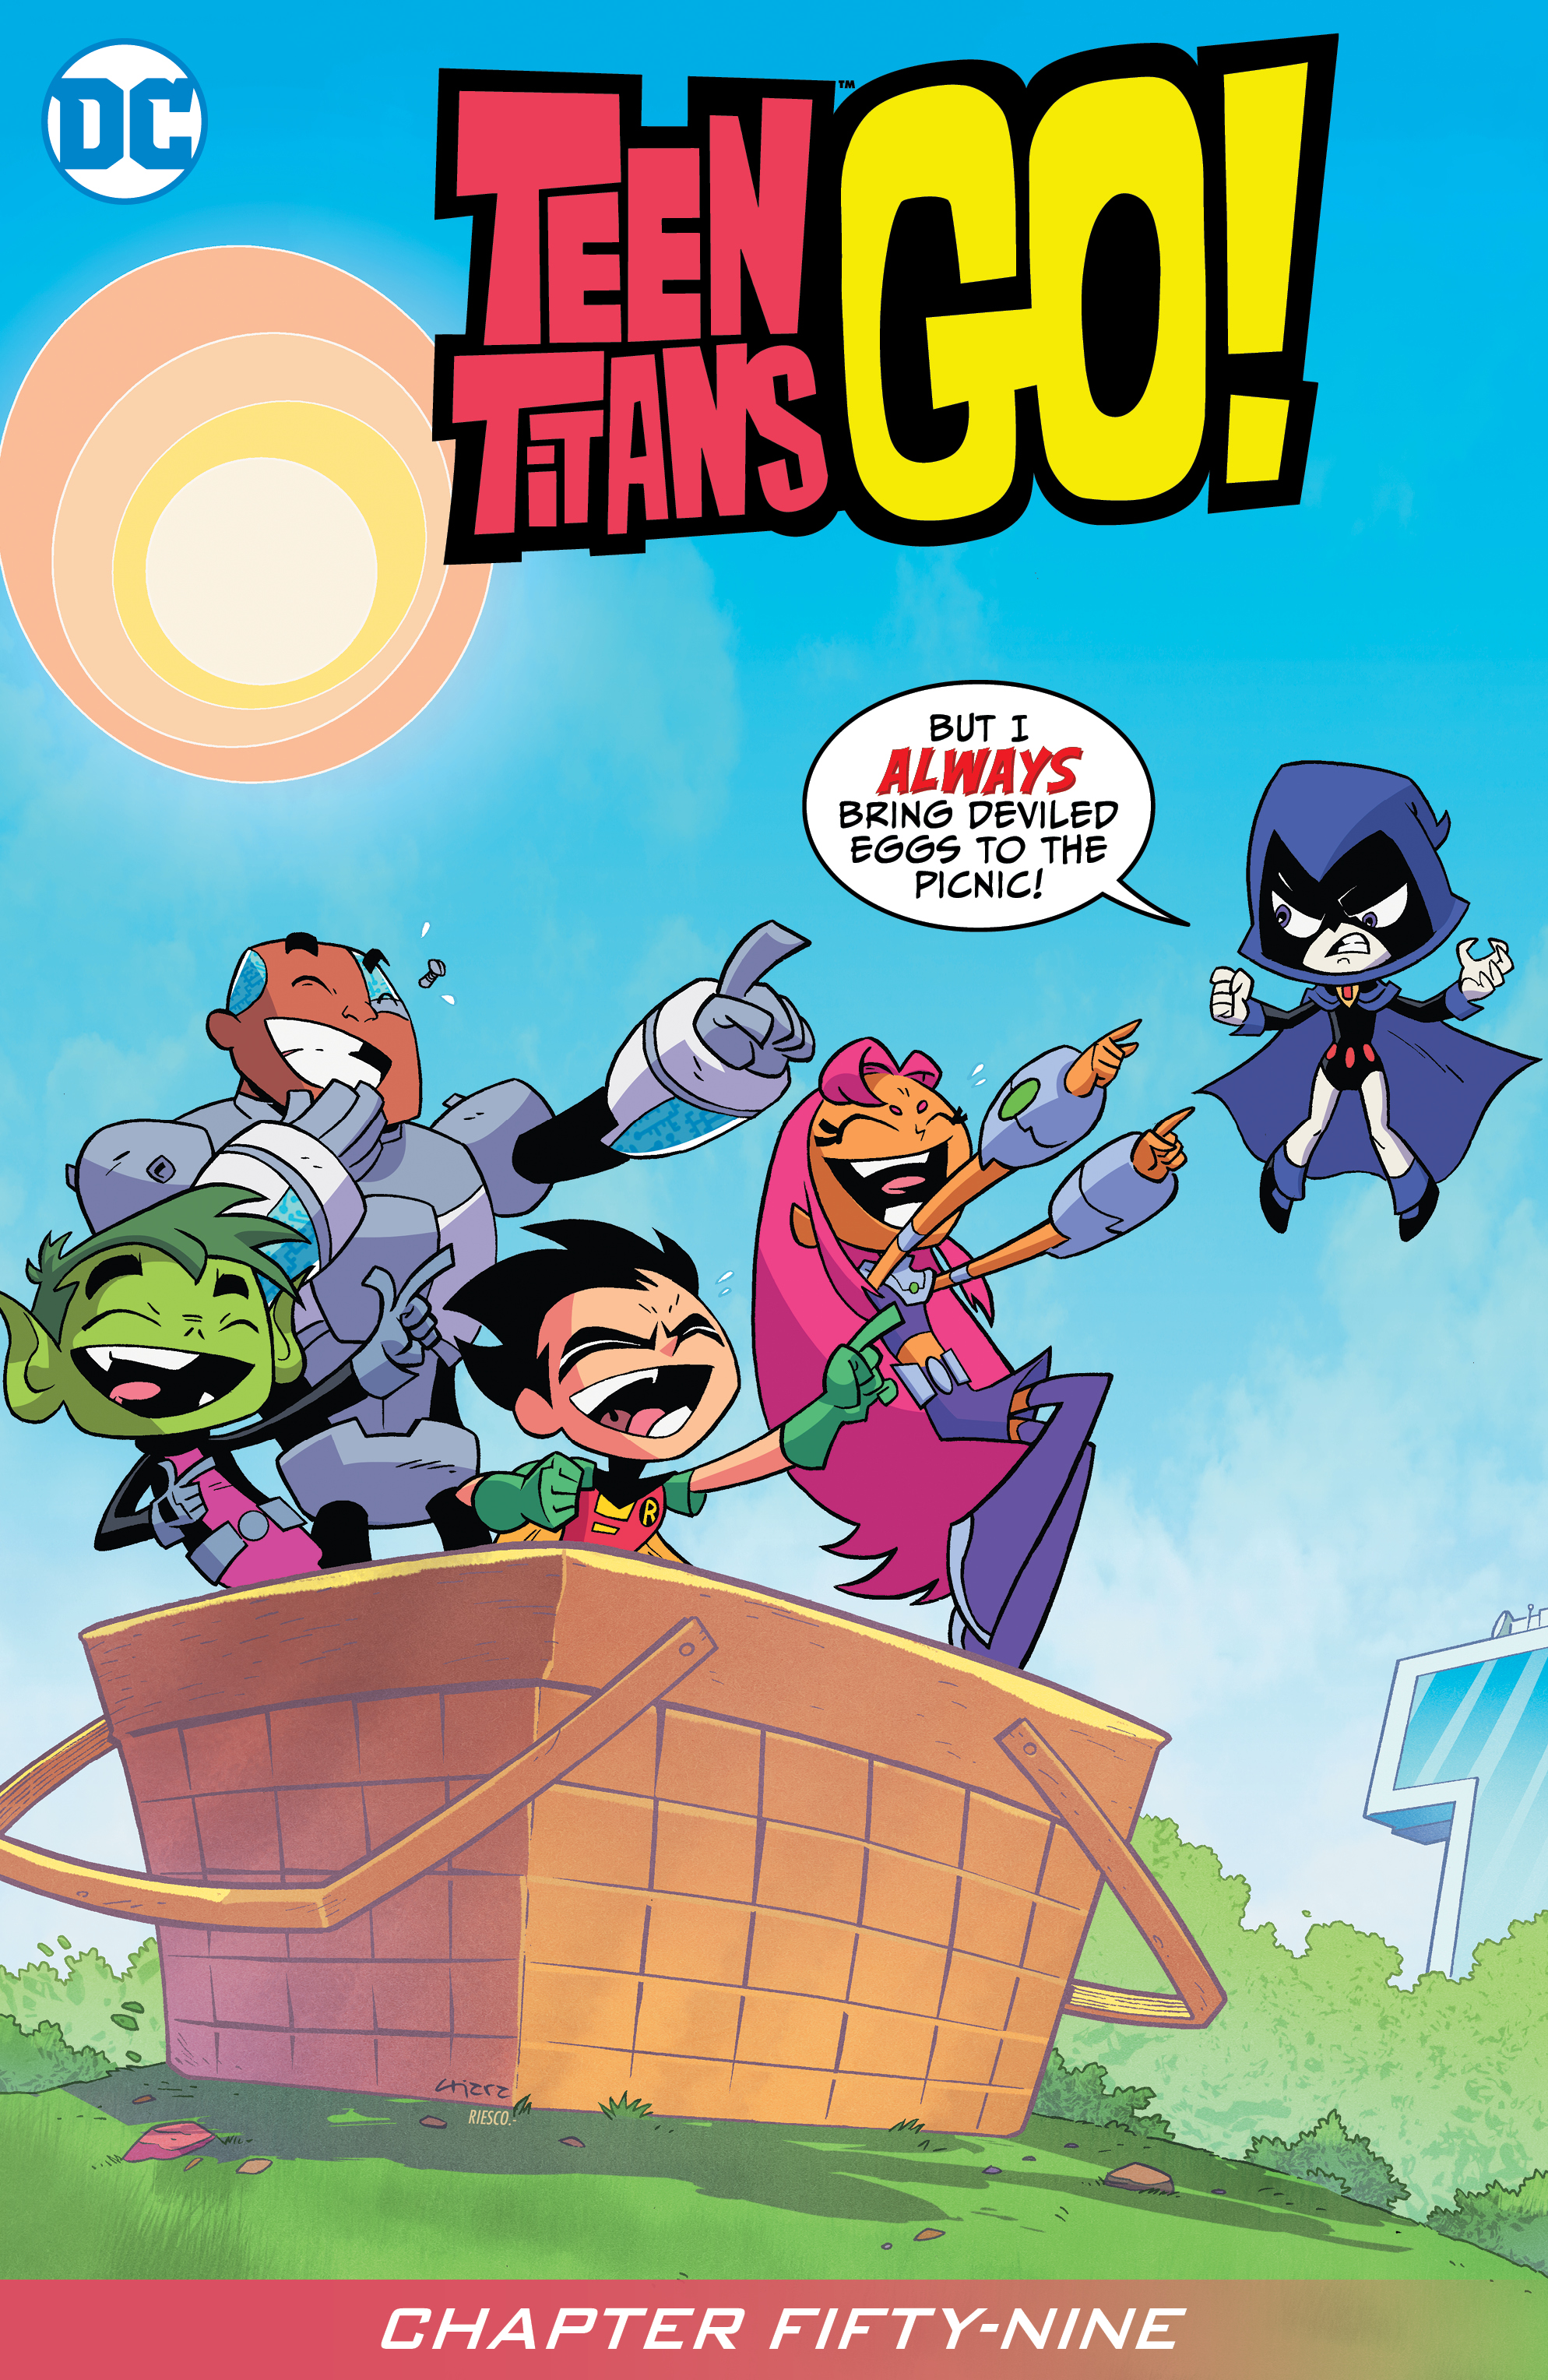 Teen Titans Go! (2013-) #59 preview images